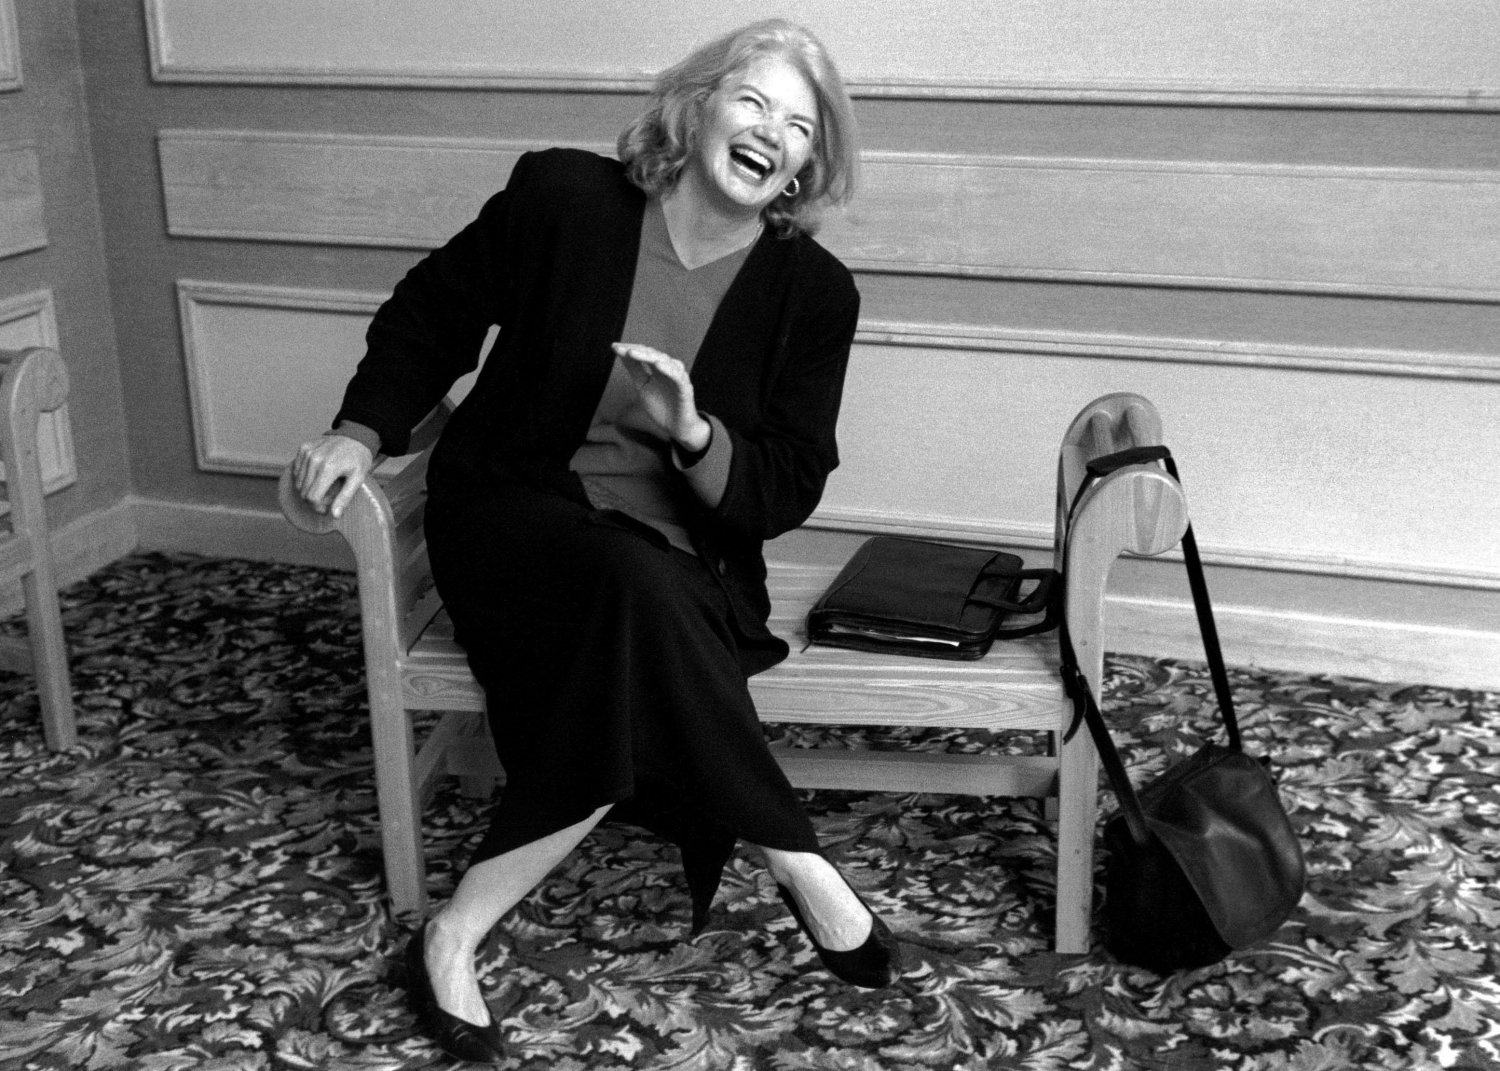 From Janice Engel's "Raise Hell: The Life & Times of Molly Ivins." Photo: Robert Beddell